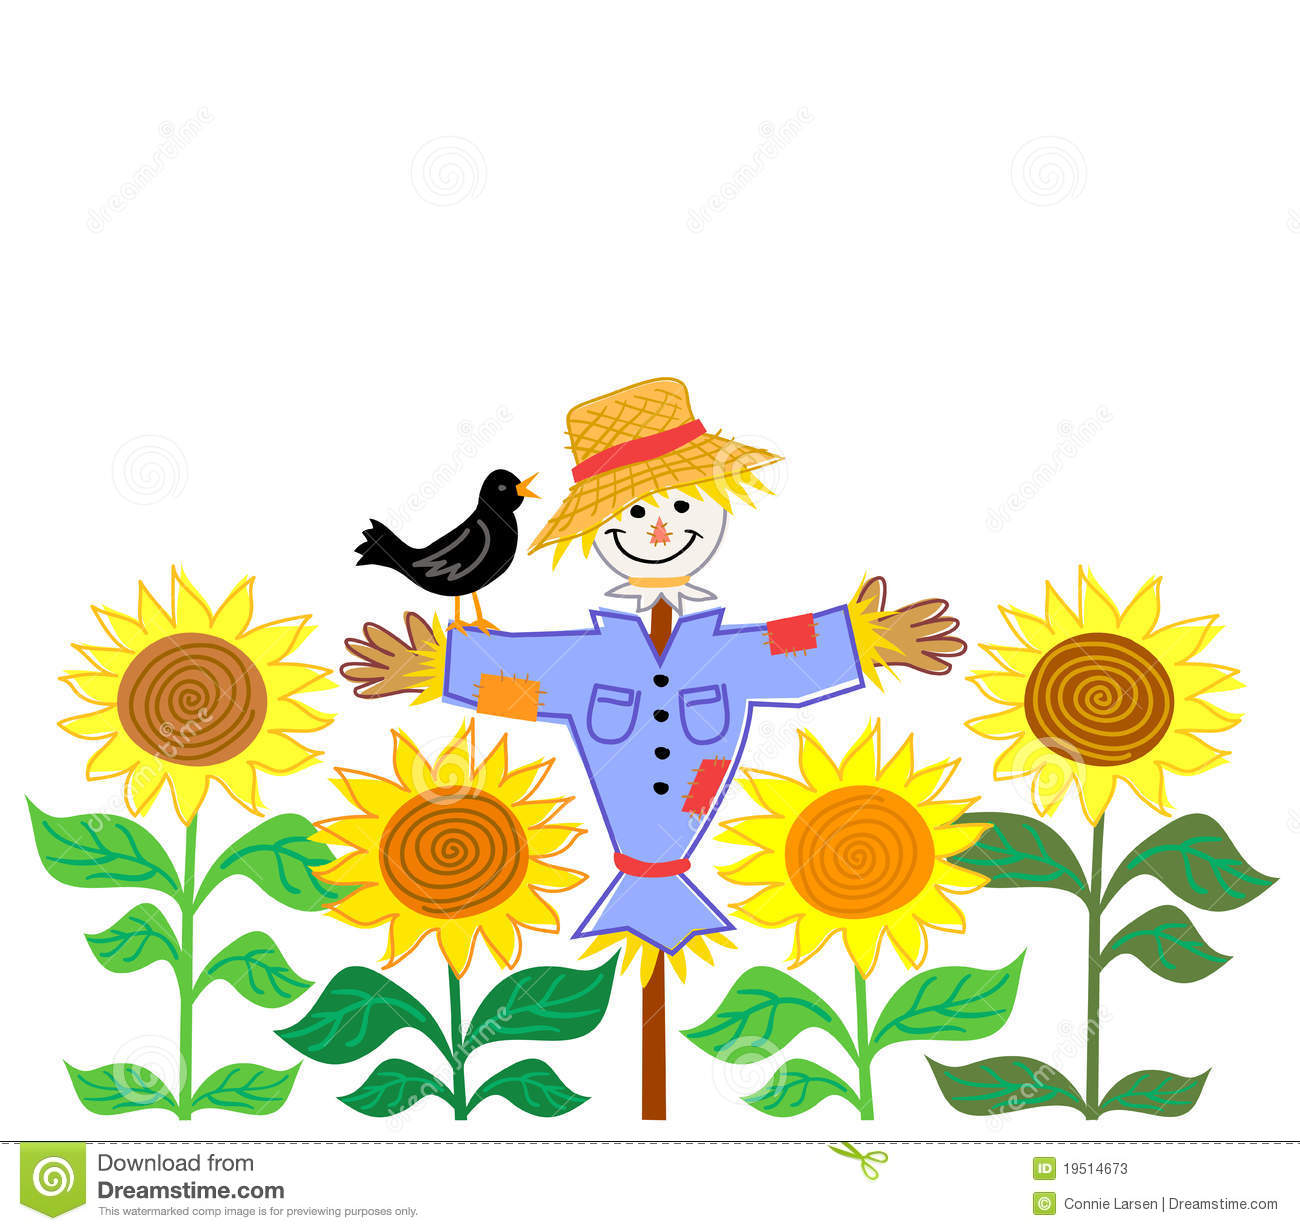 Cartoon Illustration Of A Patchwork Scarecrow In A Field Of Sunflowers